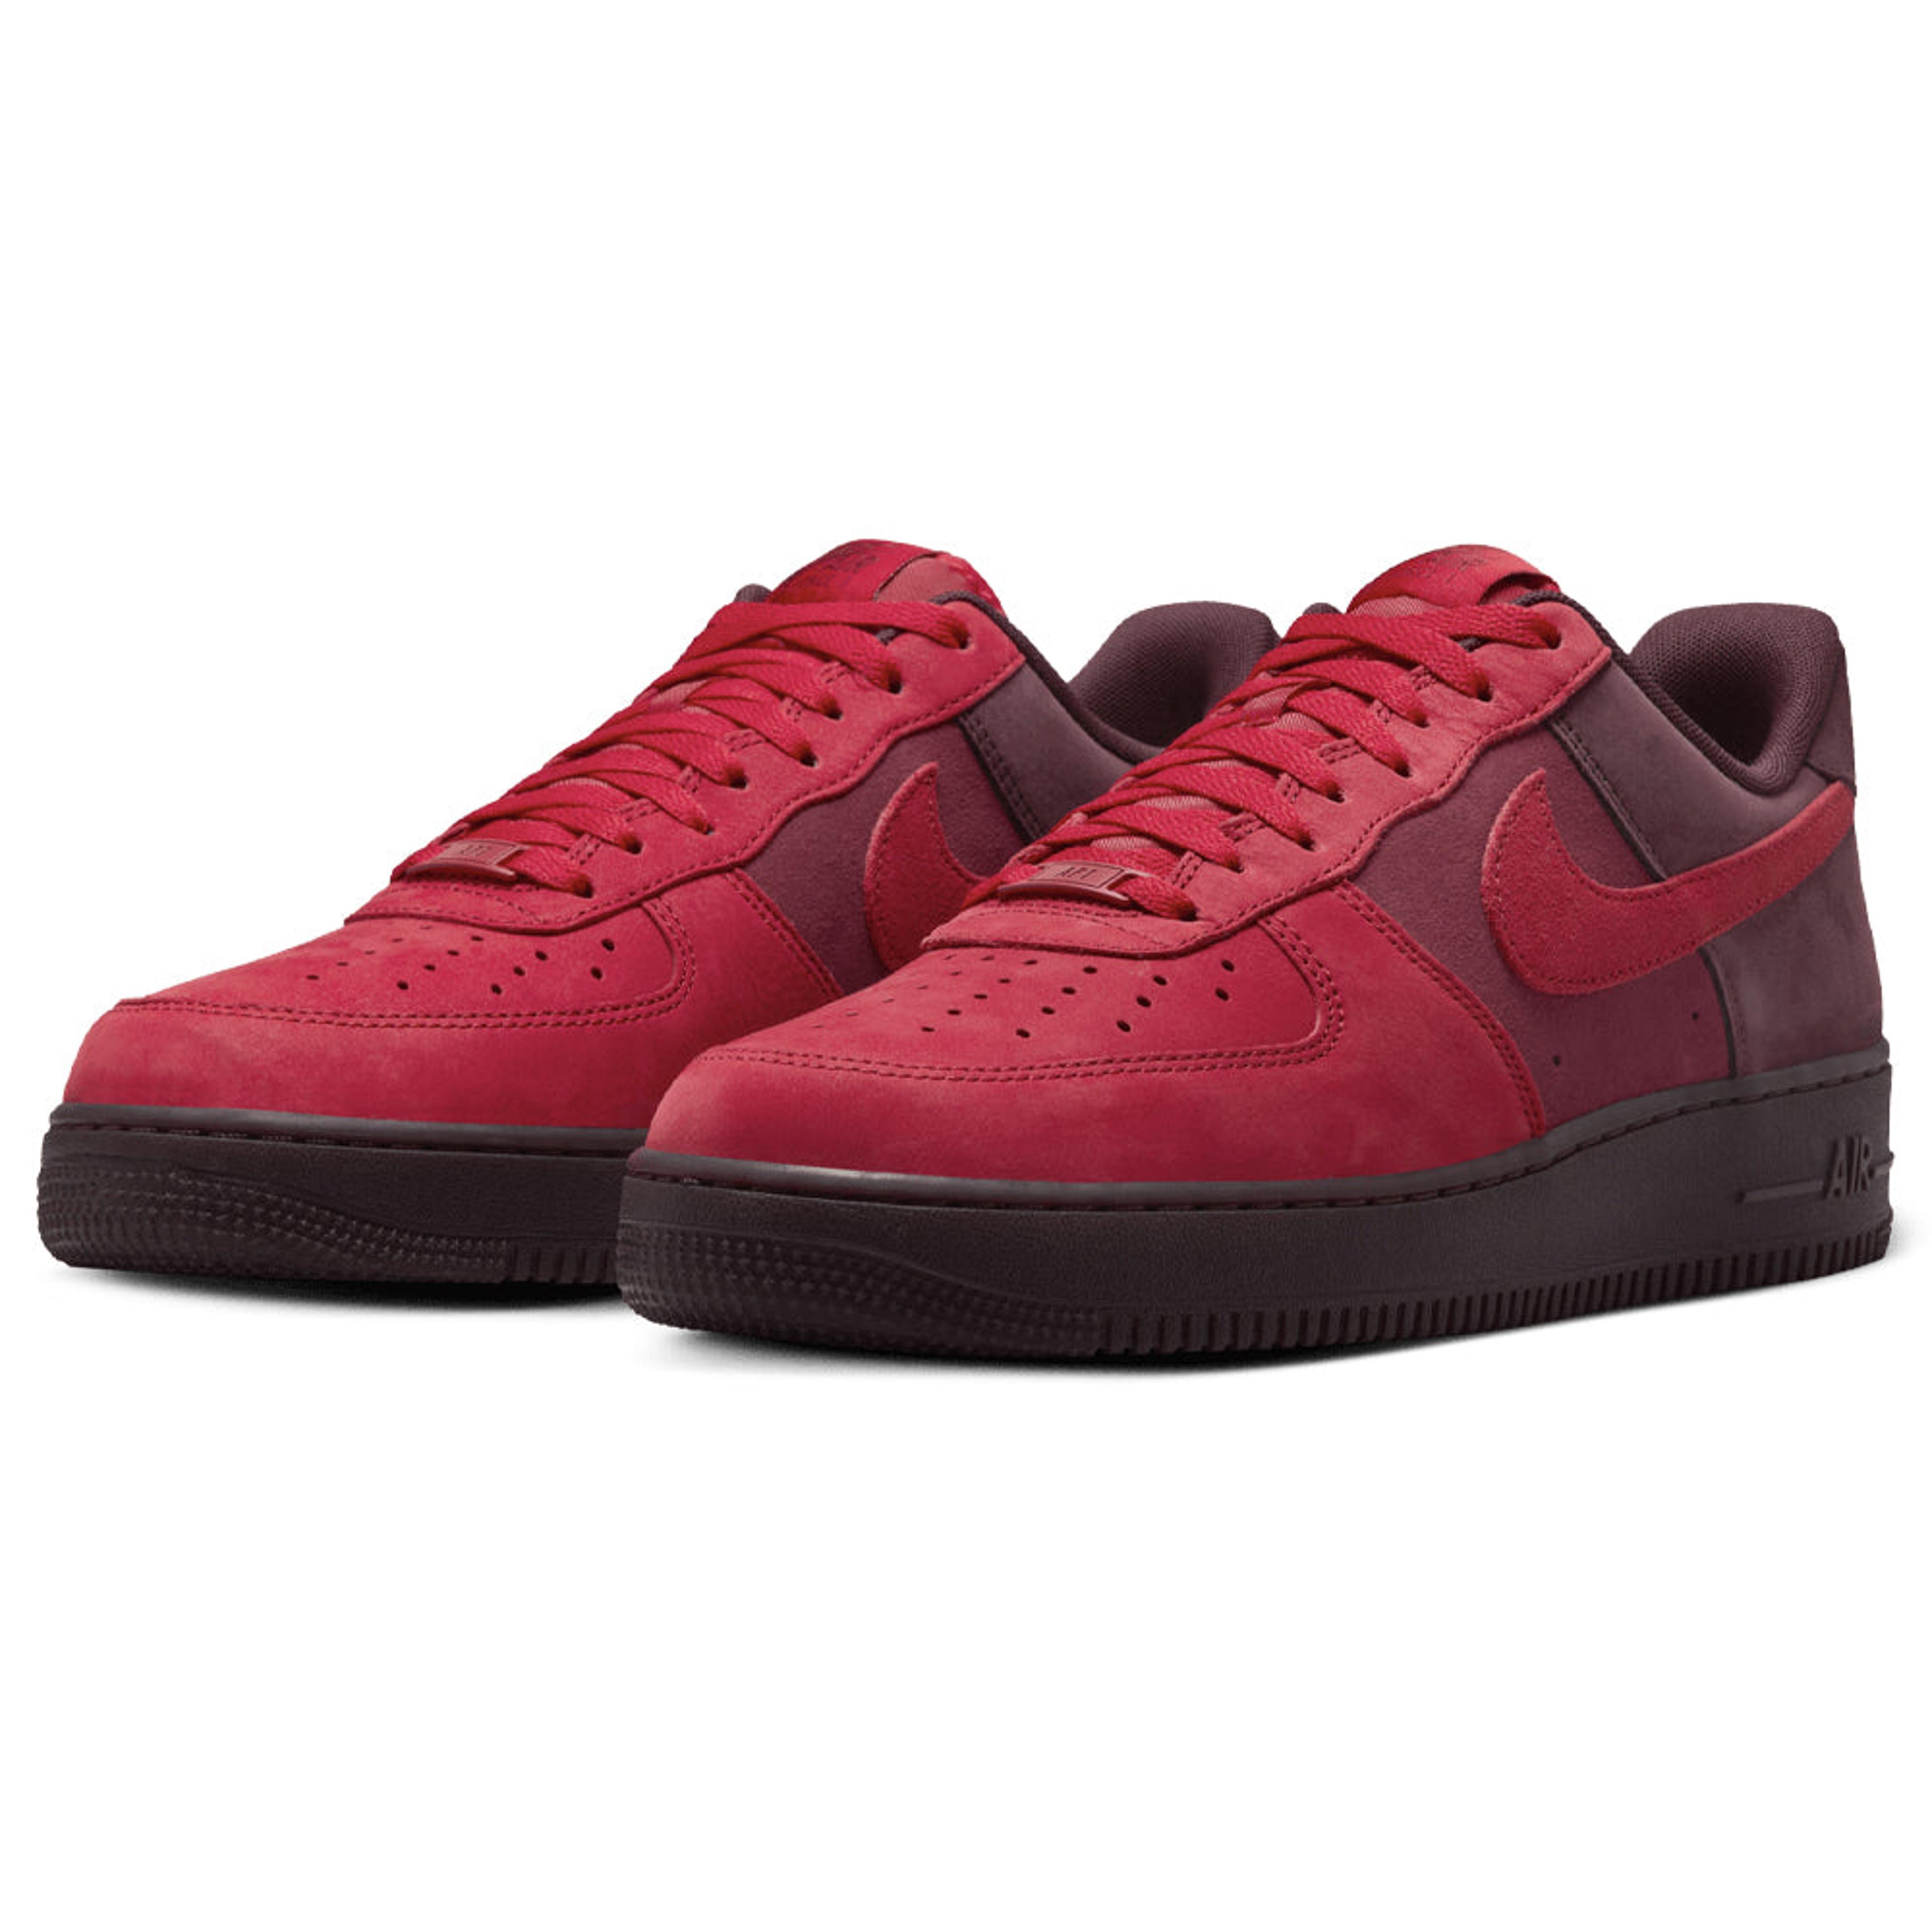 Alternate View 1 of Air Force 1 '07